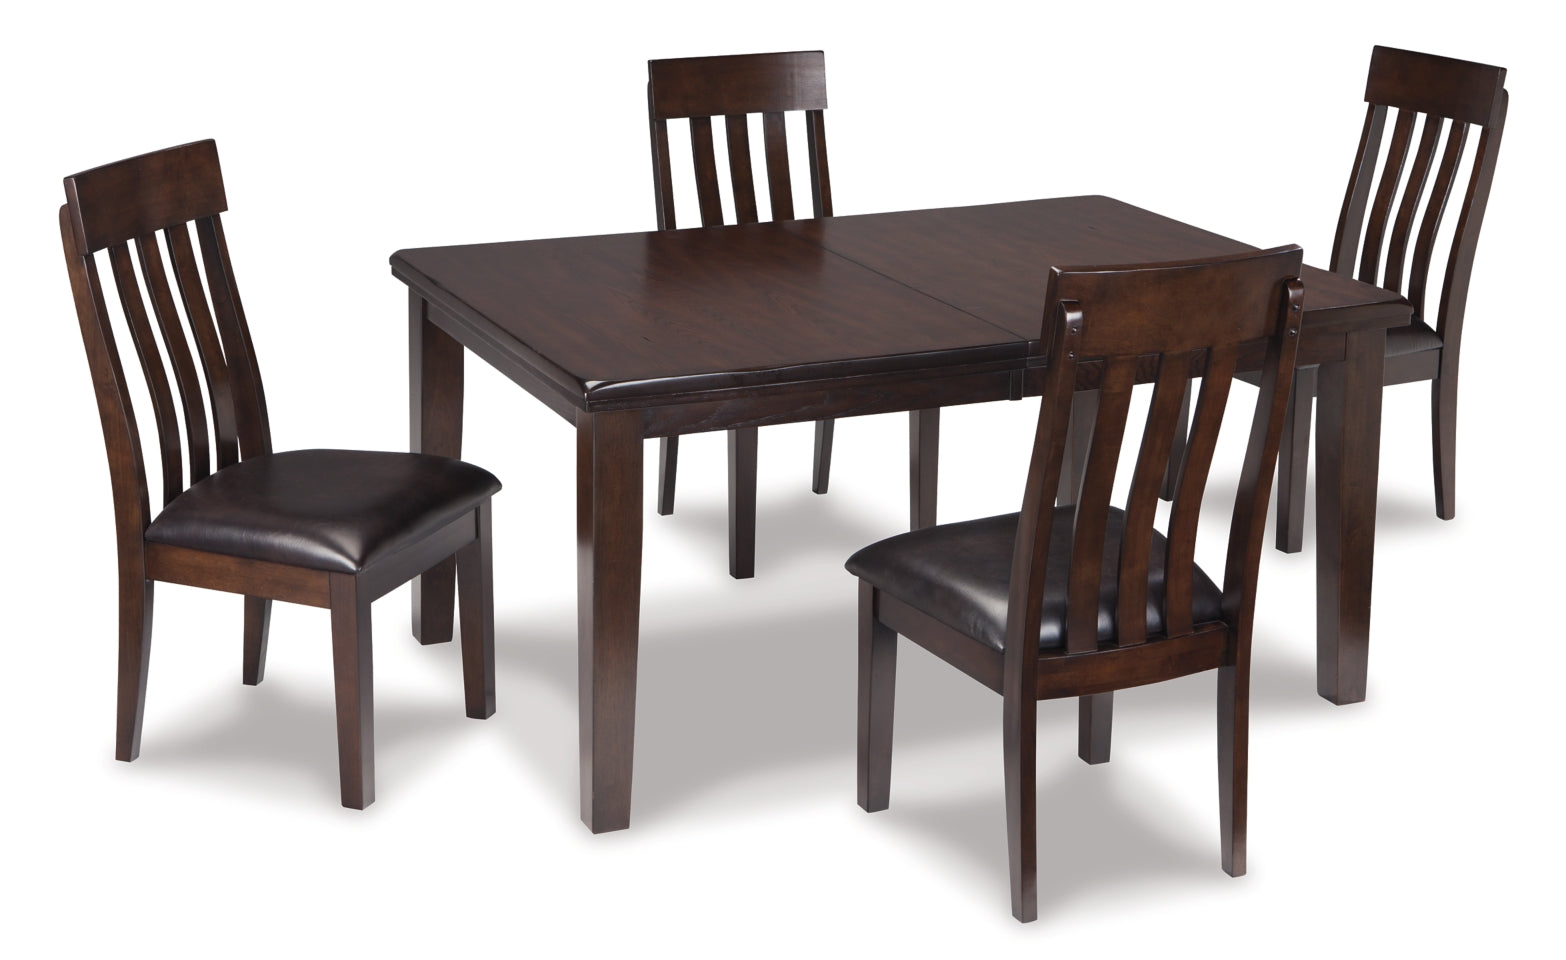 Haddigan Dining Table and 4 Chairs - furniture place usa